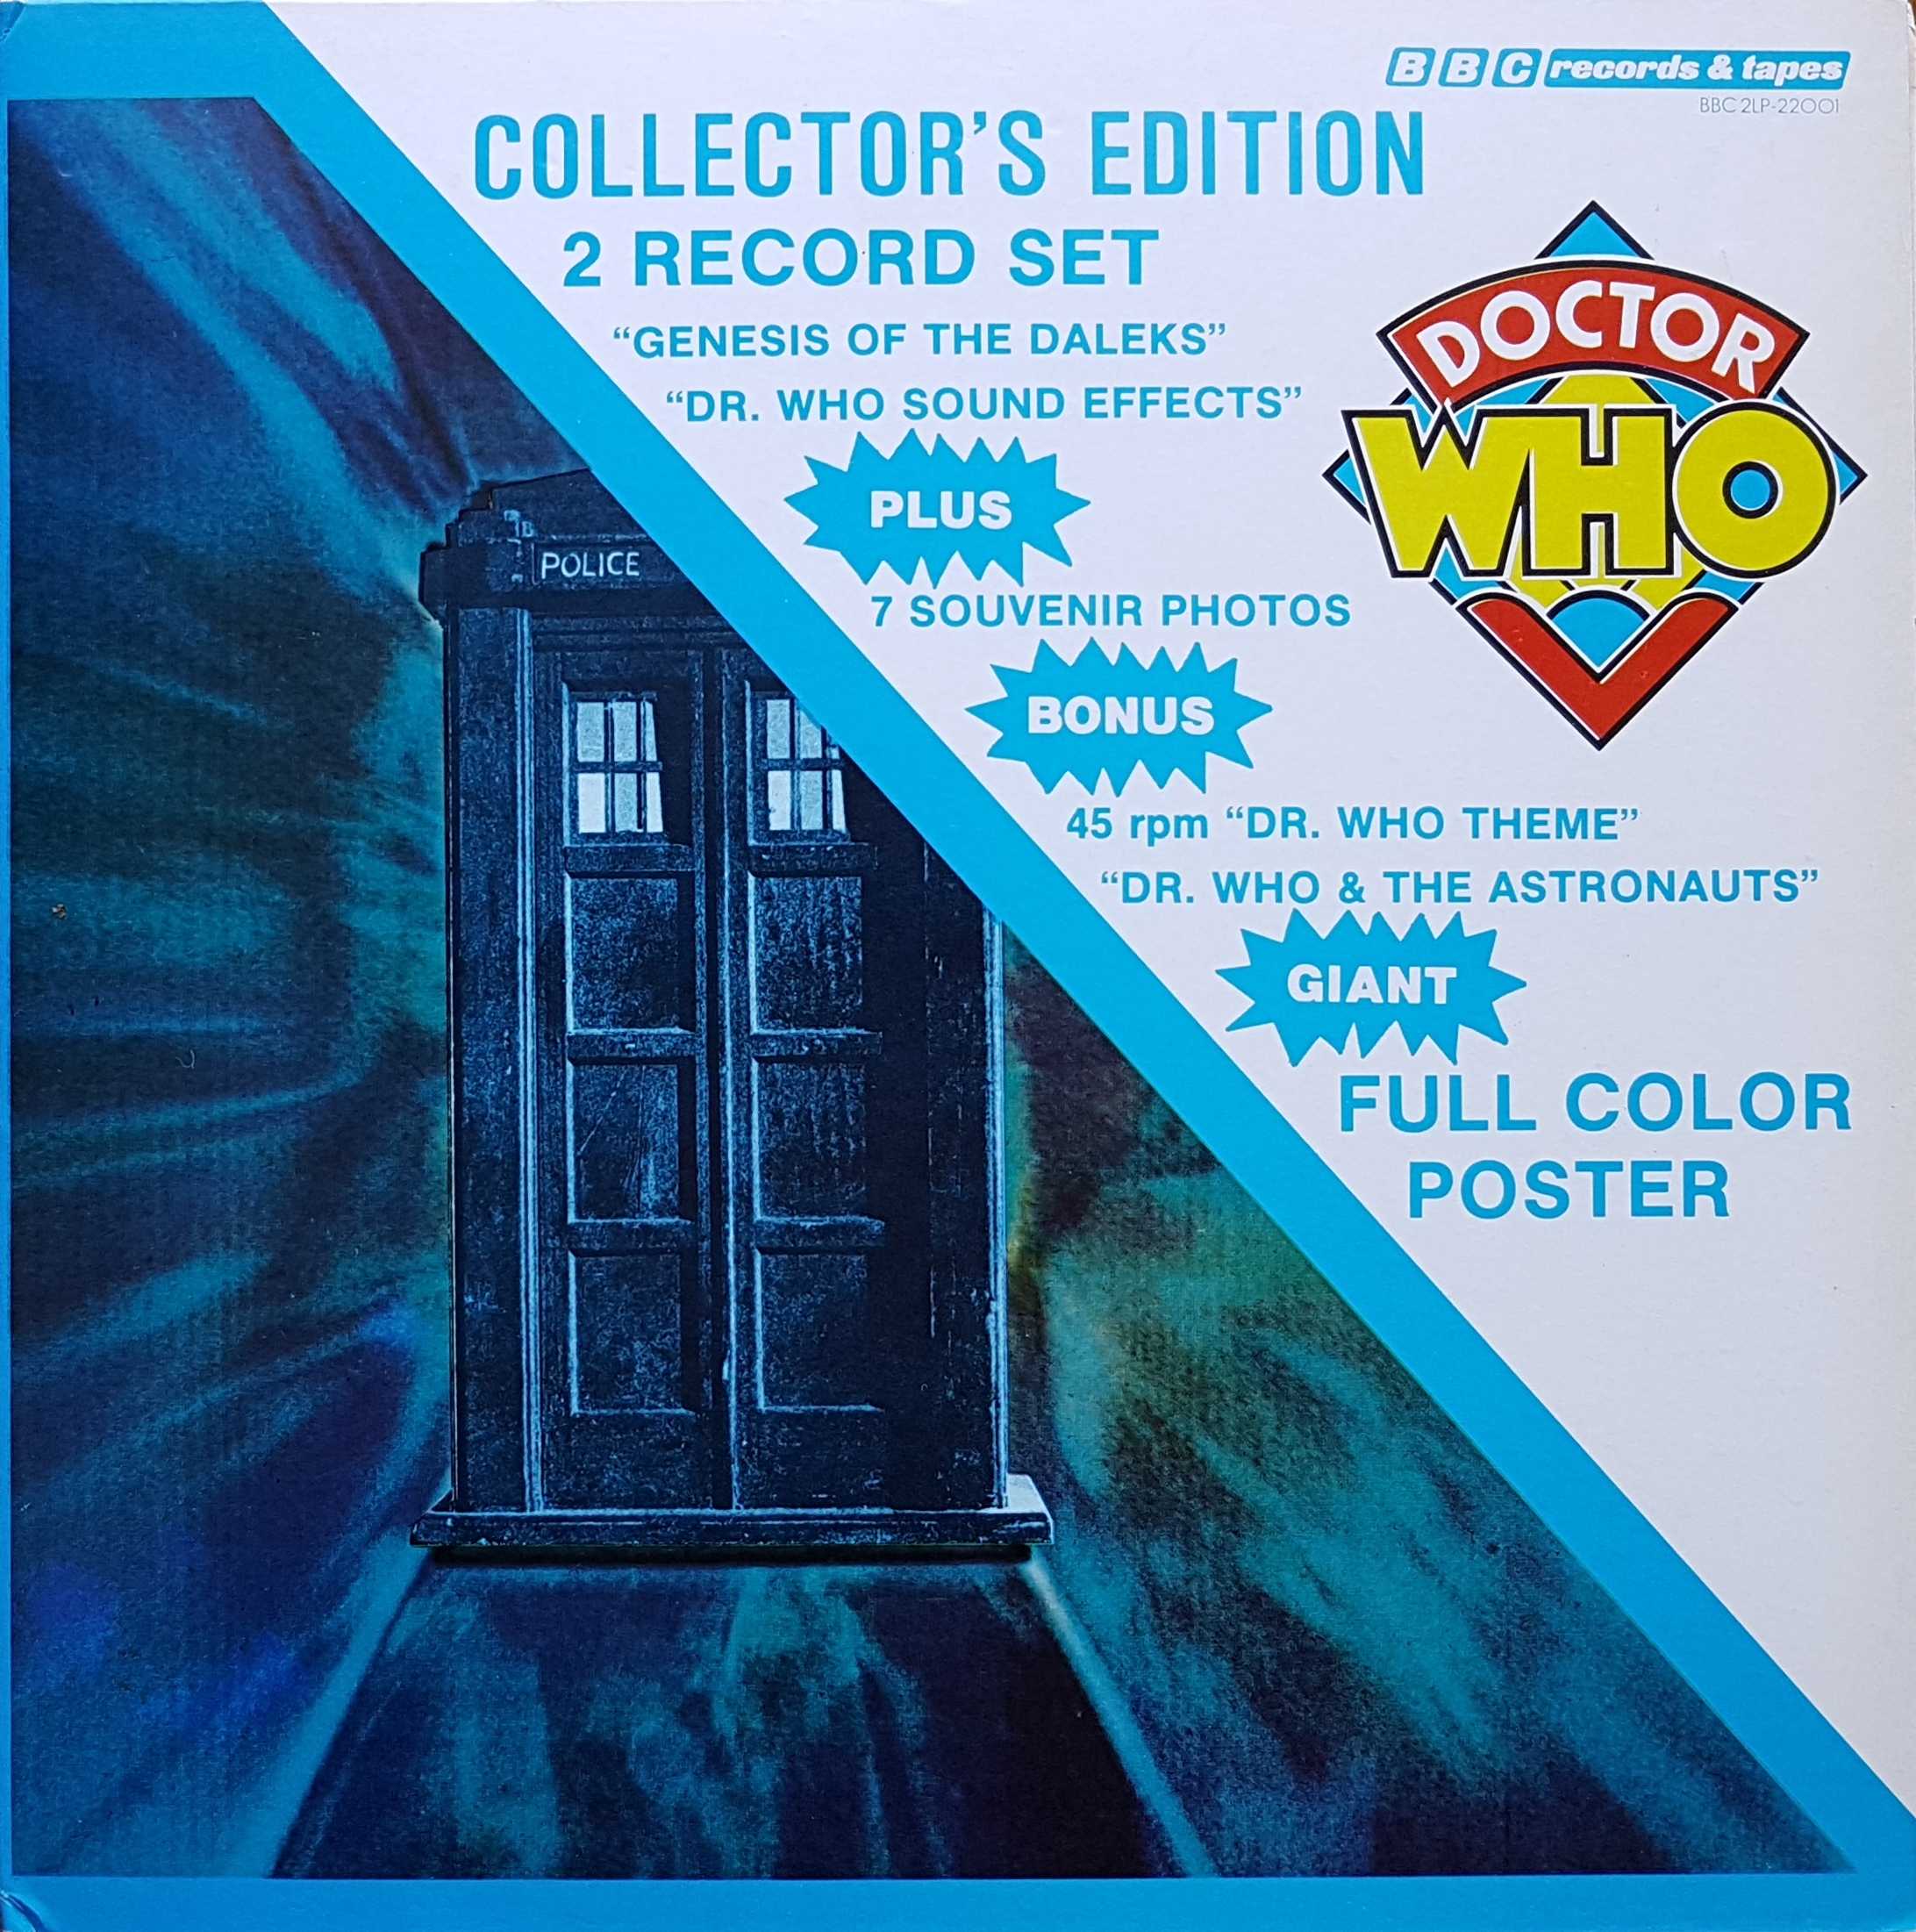 Picture of BBC2LP-22001 Doctor Who - Collectors edition (US import) by artist Various from the BBC albums - Records and Tapes library